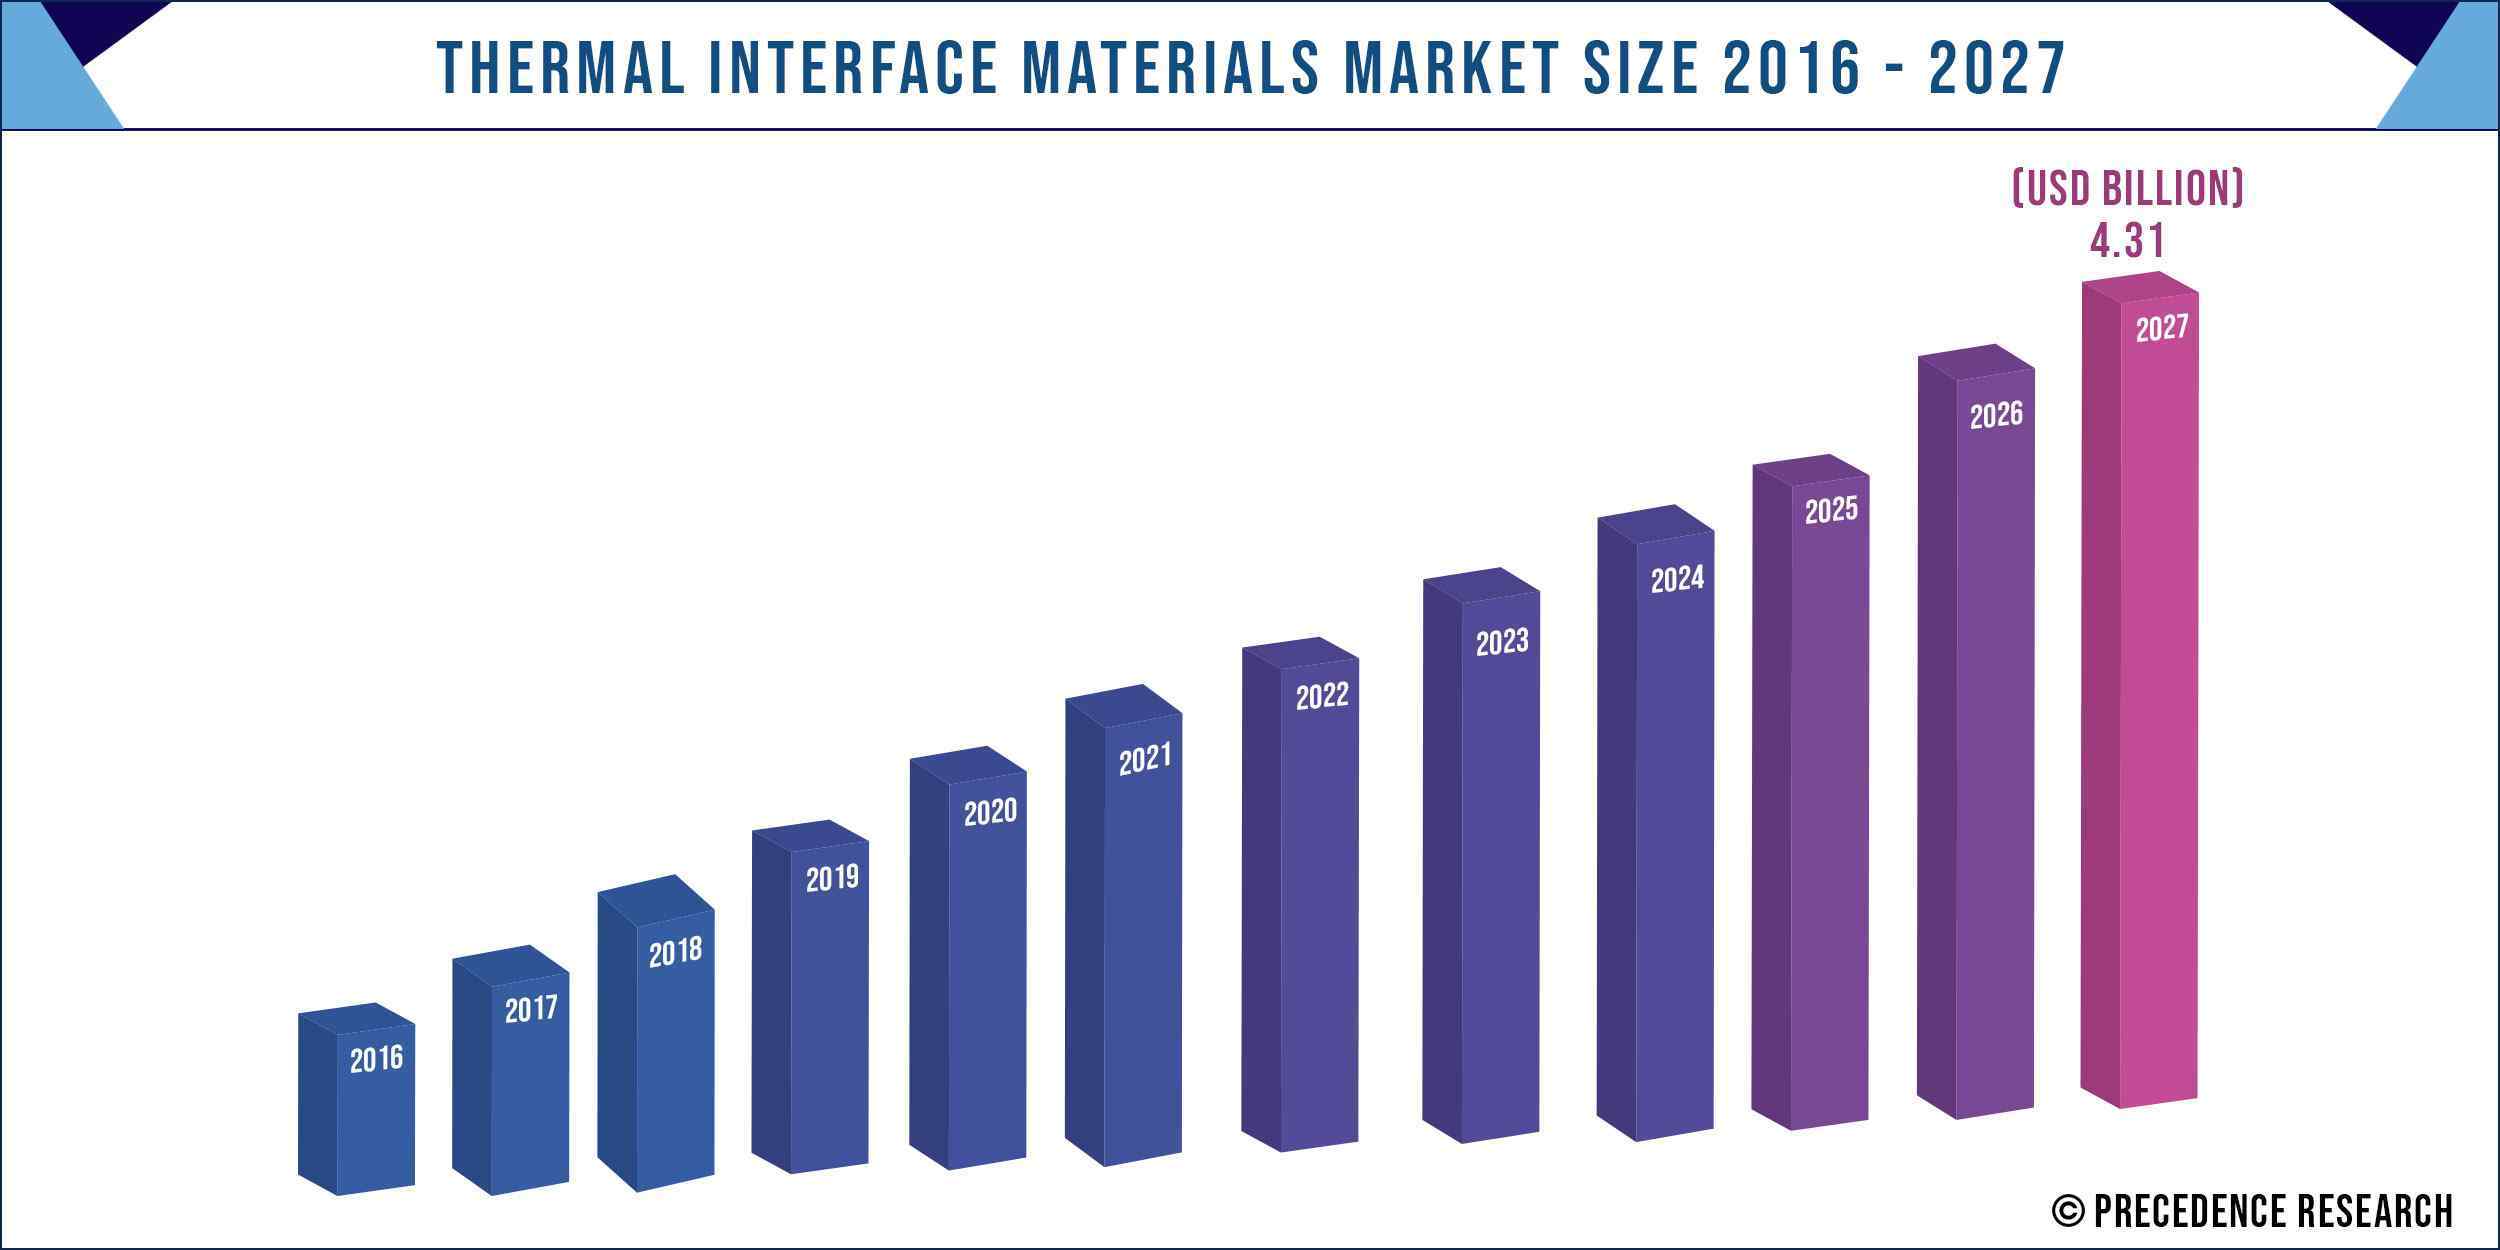 Thermal Interface Materials Market Size 2016 to 2027